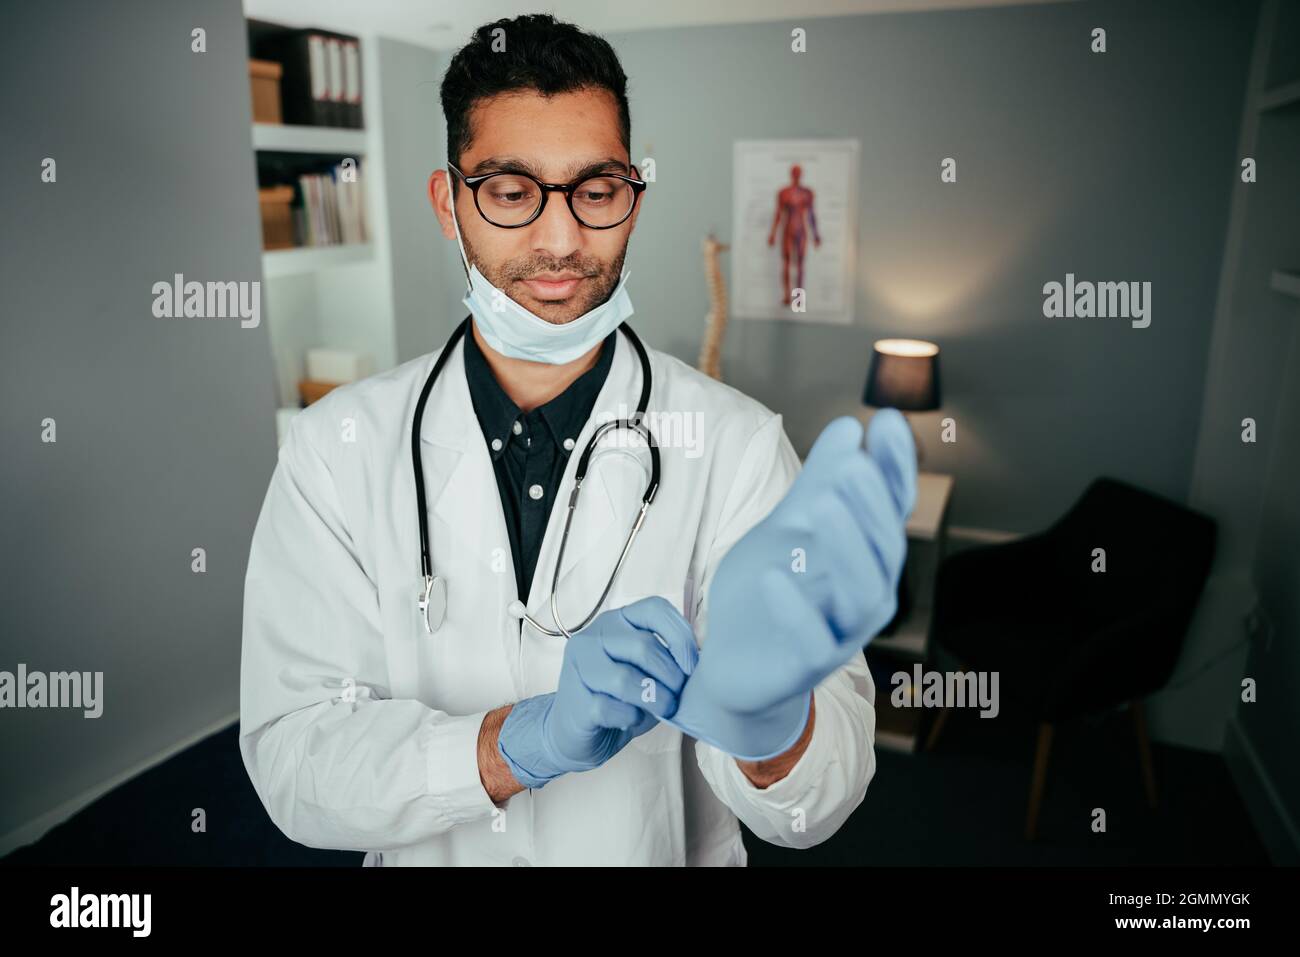 Mixed race male doctor working in office preparing for appointment putting surgical gloves on Stock Photo